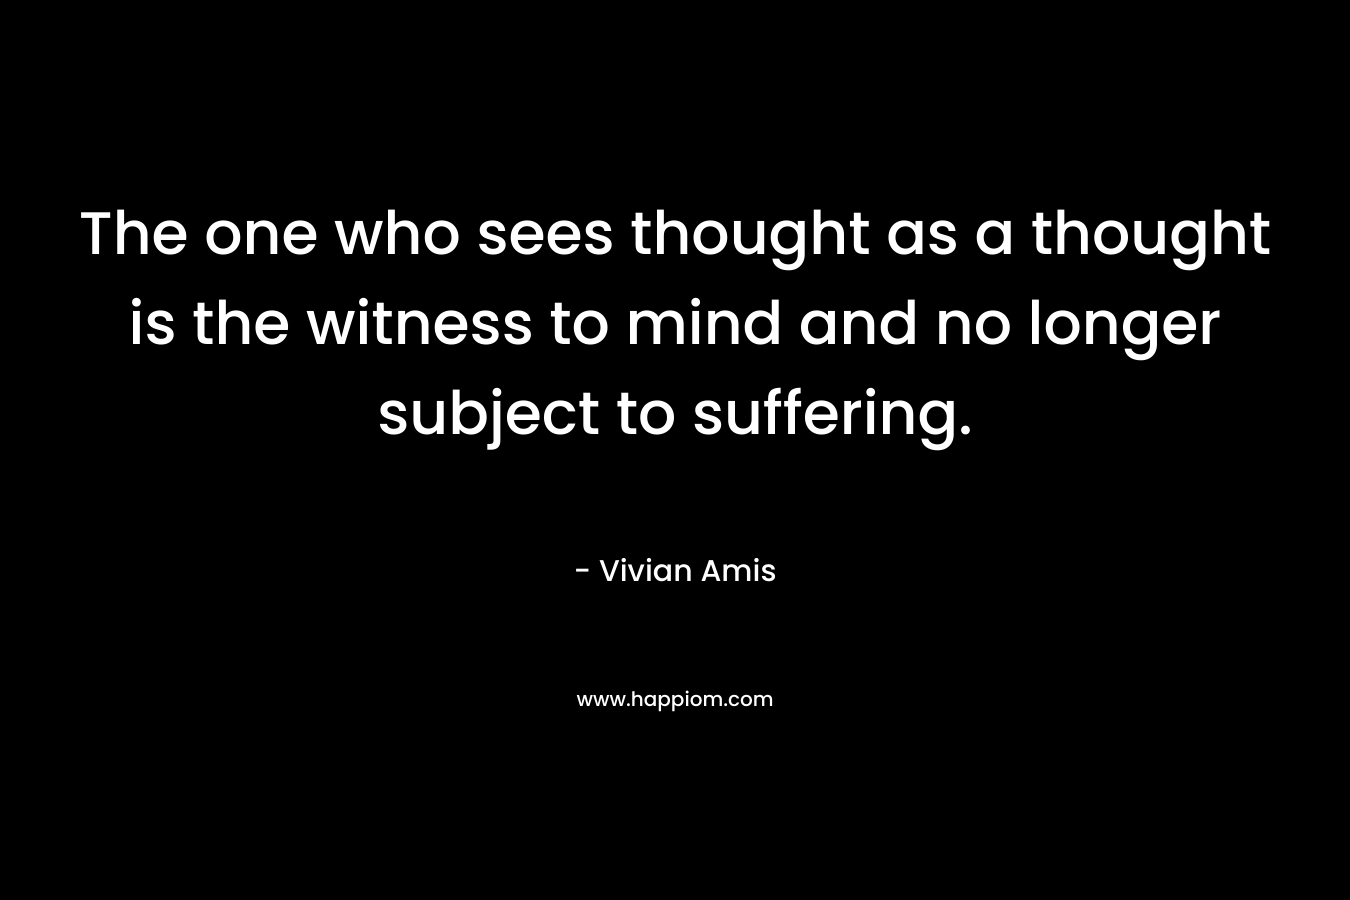 The one who sees thought as a thought is the witness to mind and no longer subject to suffering.